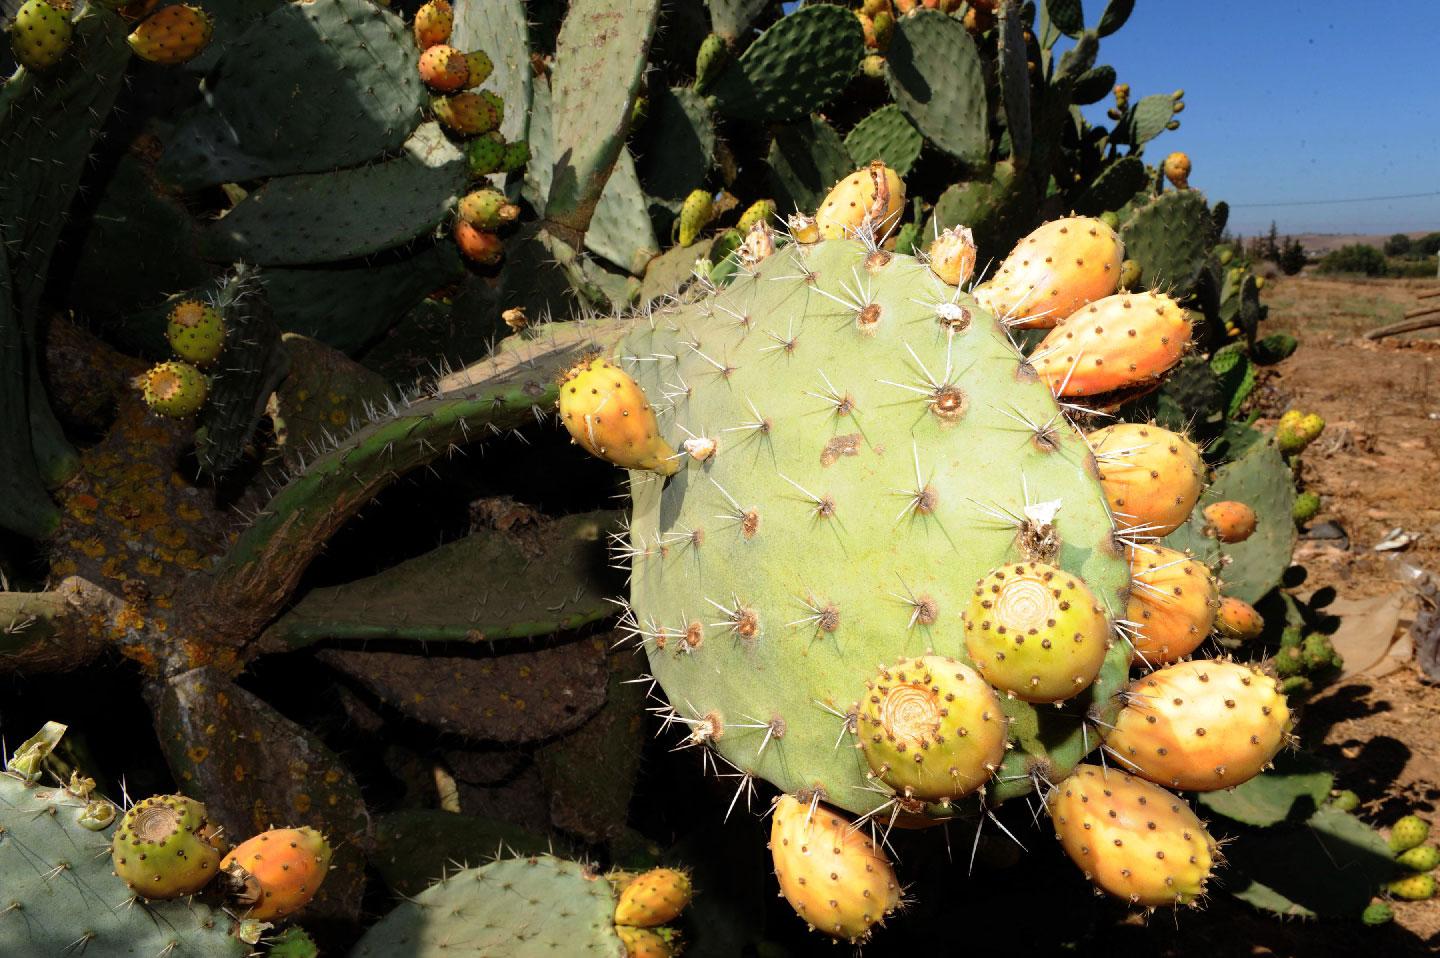 Photo taken on August 6, 2011 shows a prickly pear or barbary fig tree in the Moroccan region of Skhour Rhamna region near Marrakech.